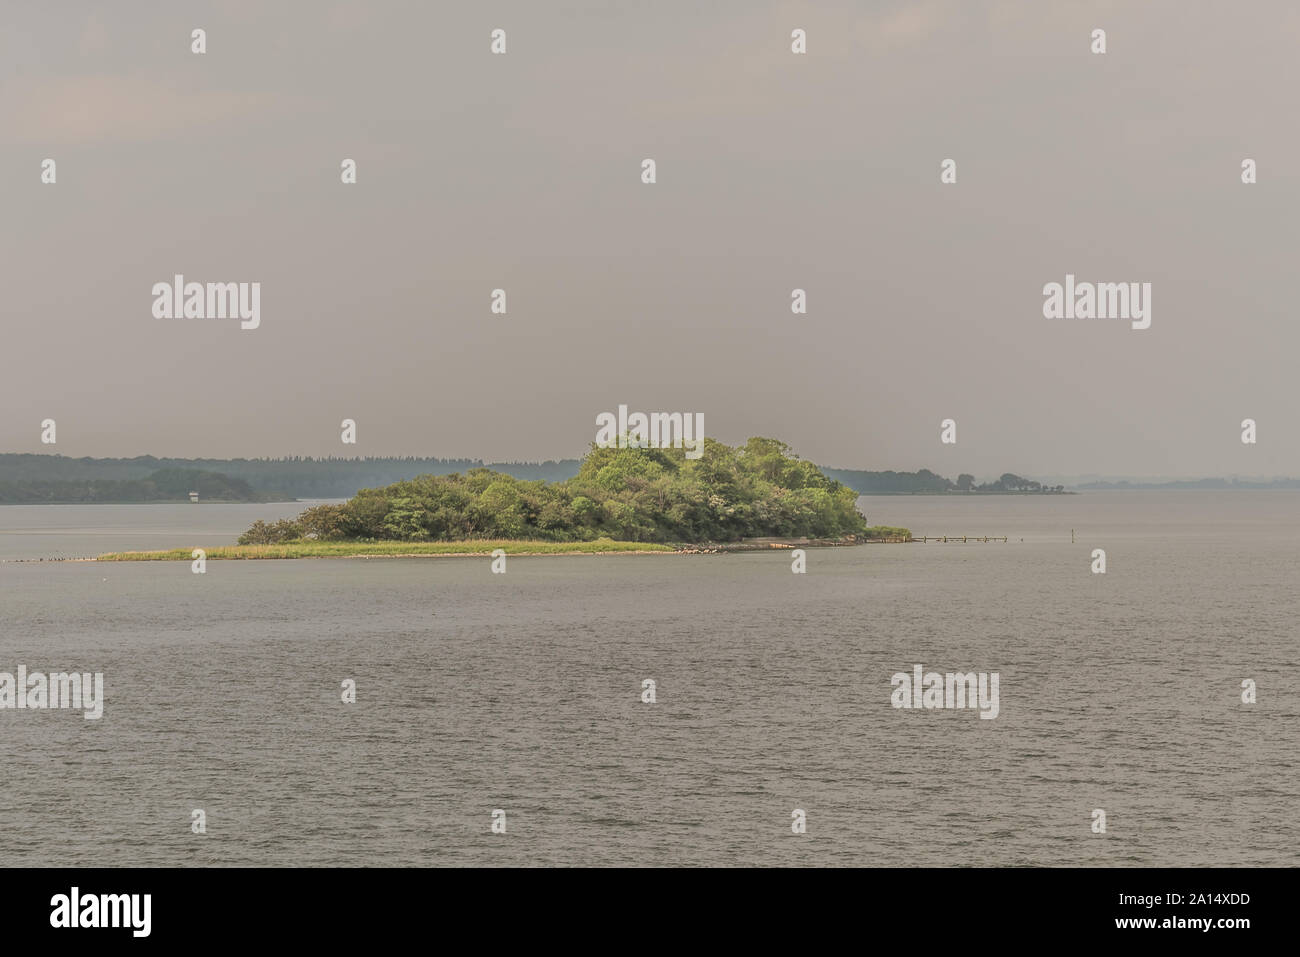 a tiny island with green trees and a jetty in the sea close to Svendborg, Denmark, July 13, 2019 Stock Photo